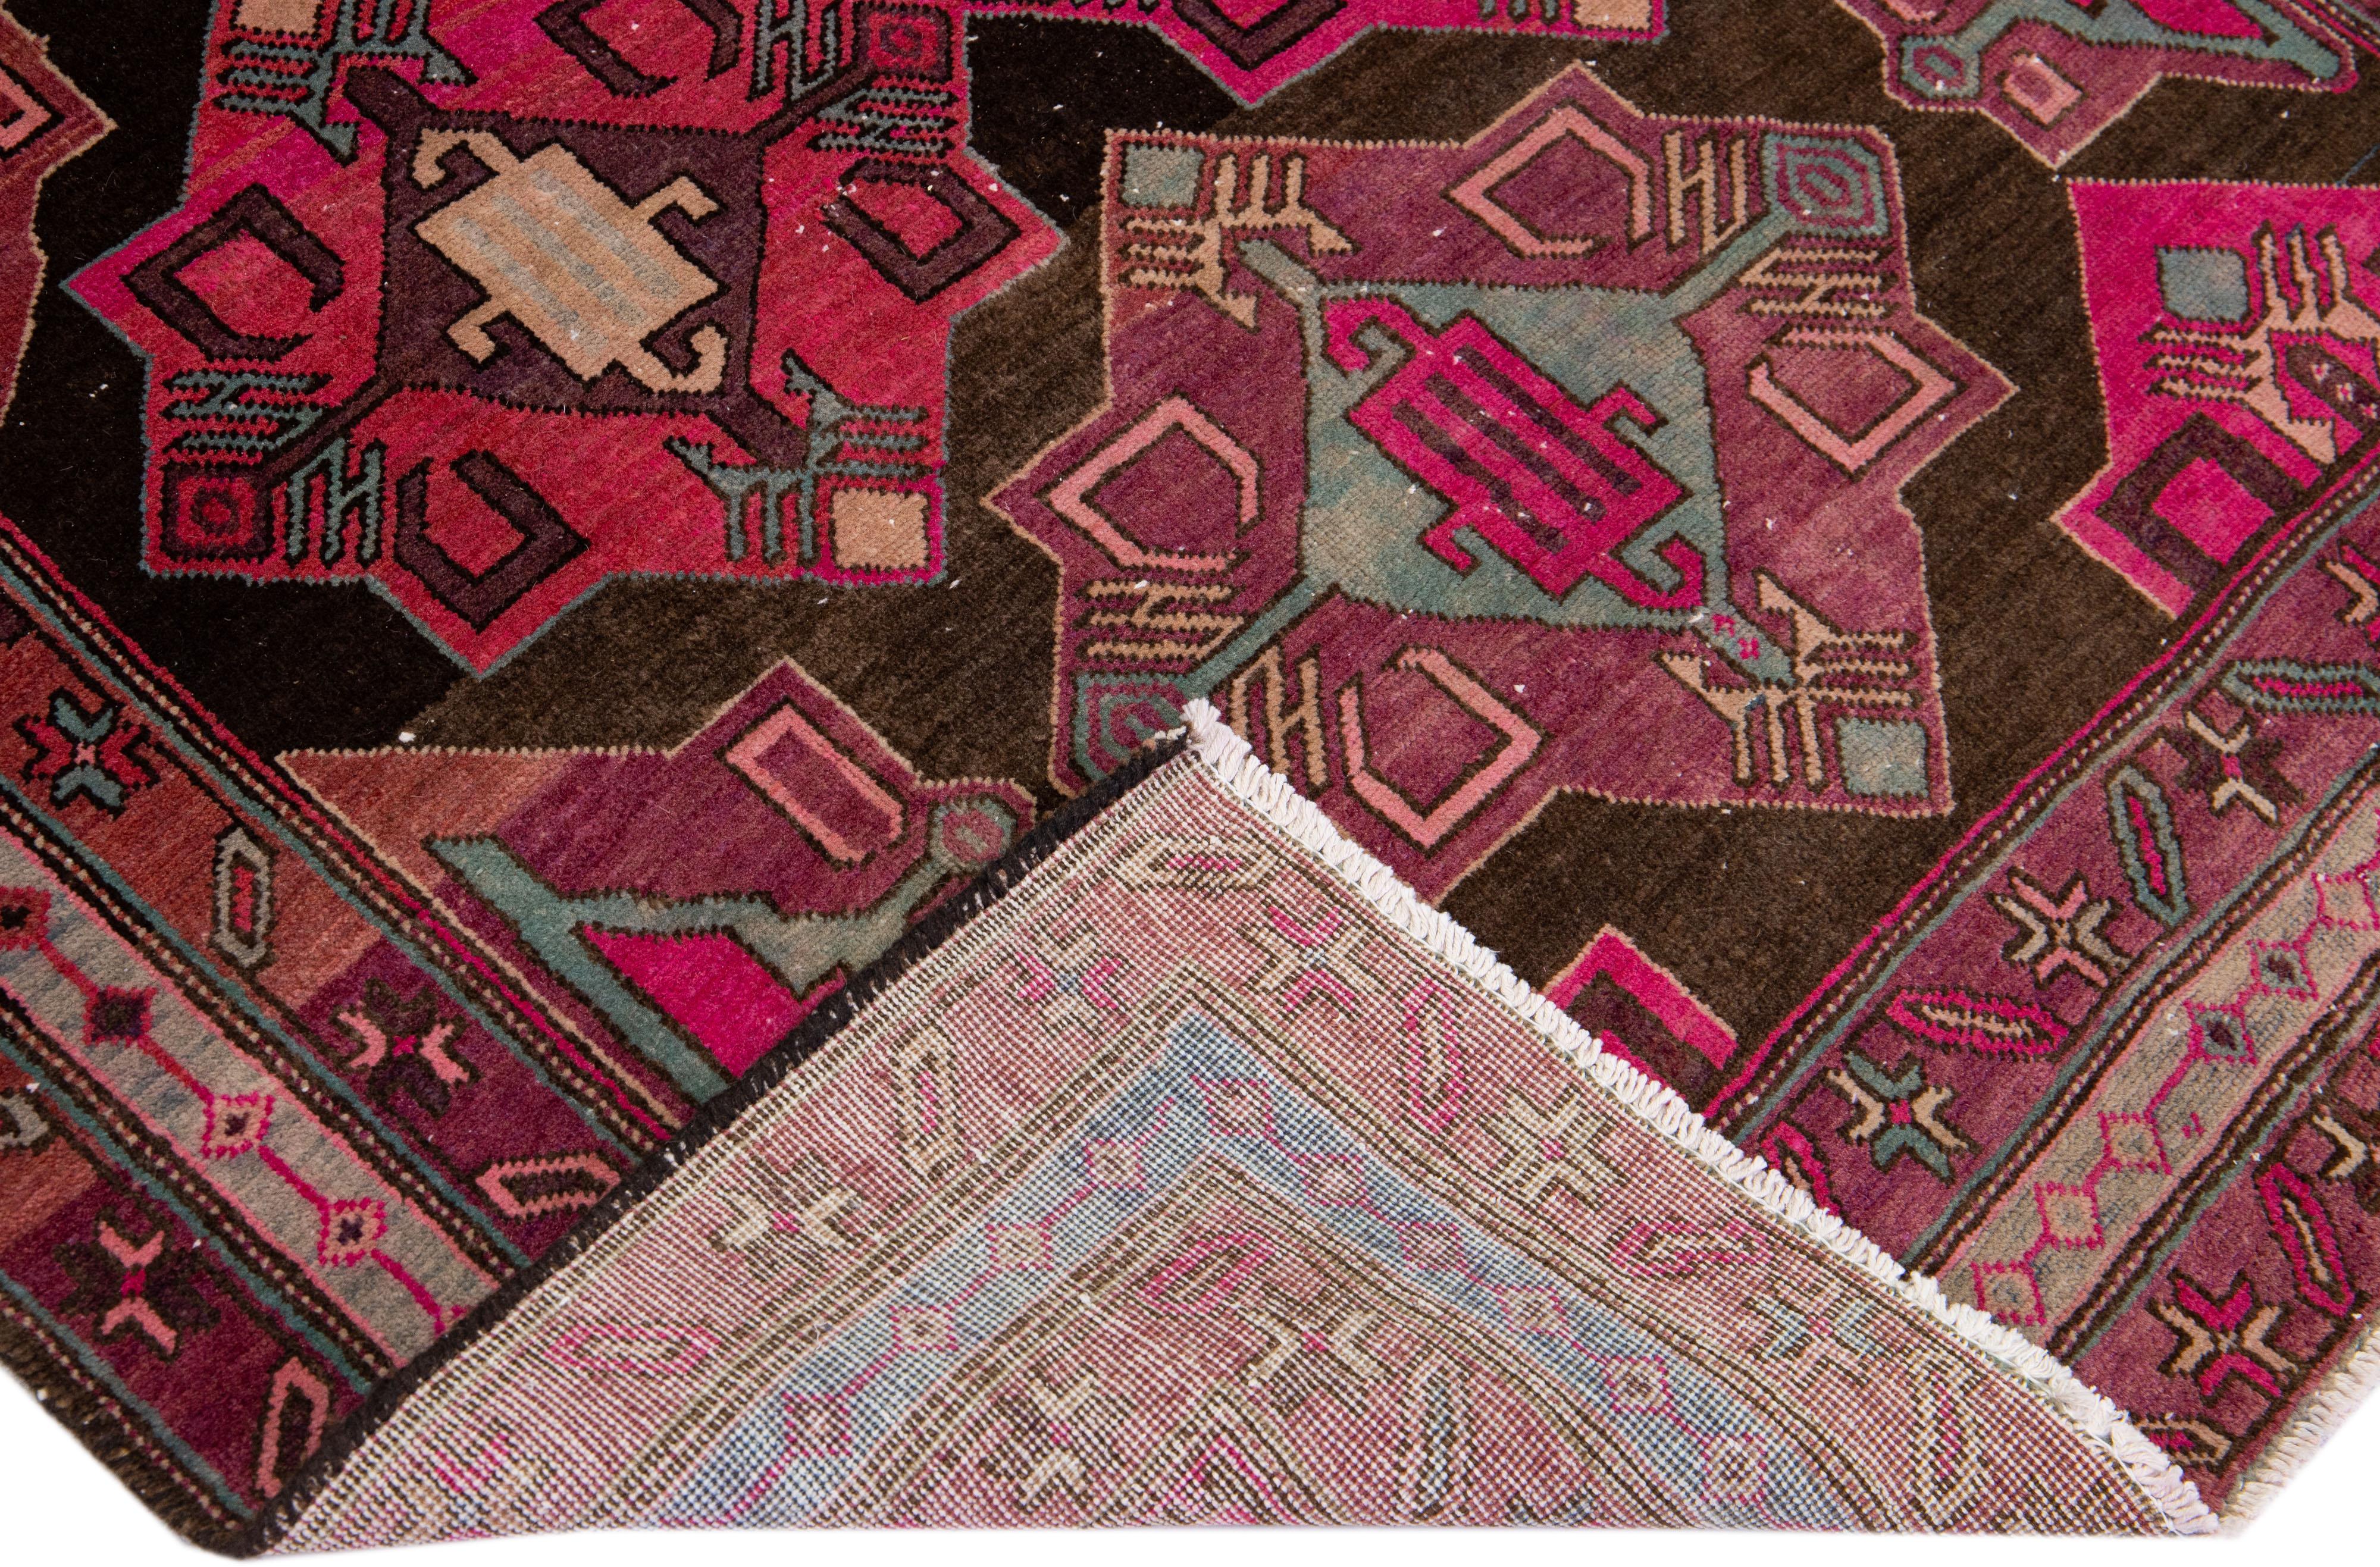 Beautiful Vintage Malayer hand-knotted wool rug with a brown color field. This Malayer piece has pink and teal accents in a gorgeous all-over geometric design.

This rug measures: 4'8